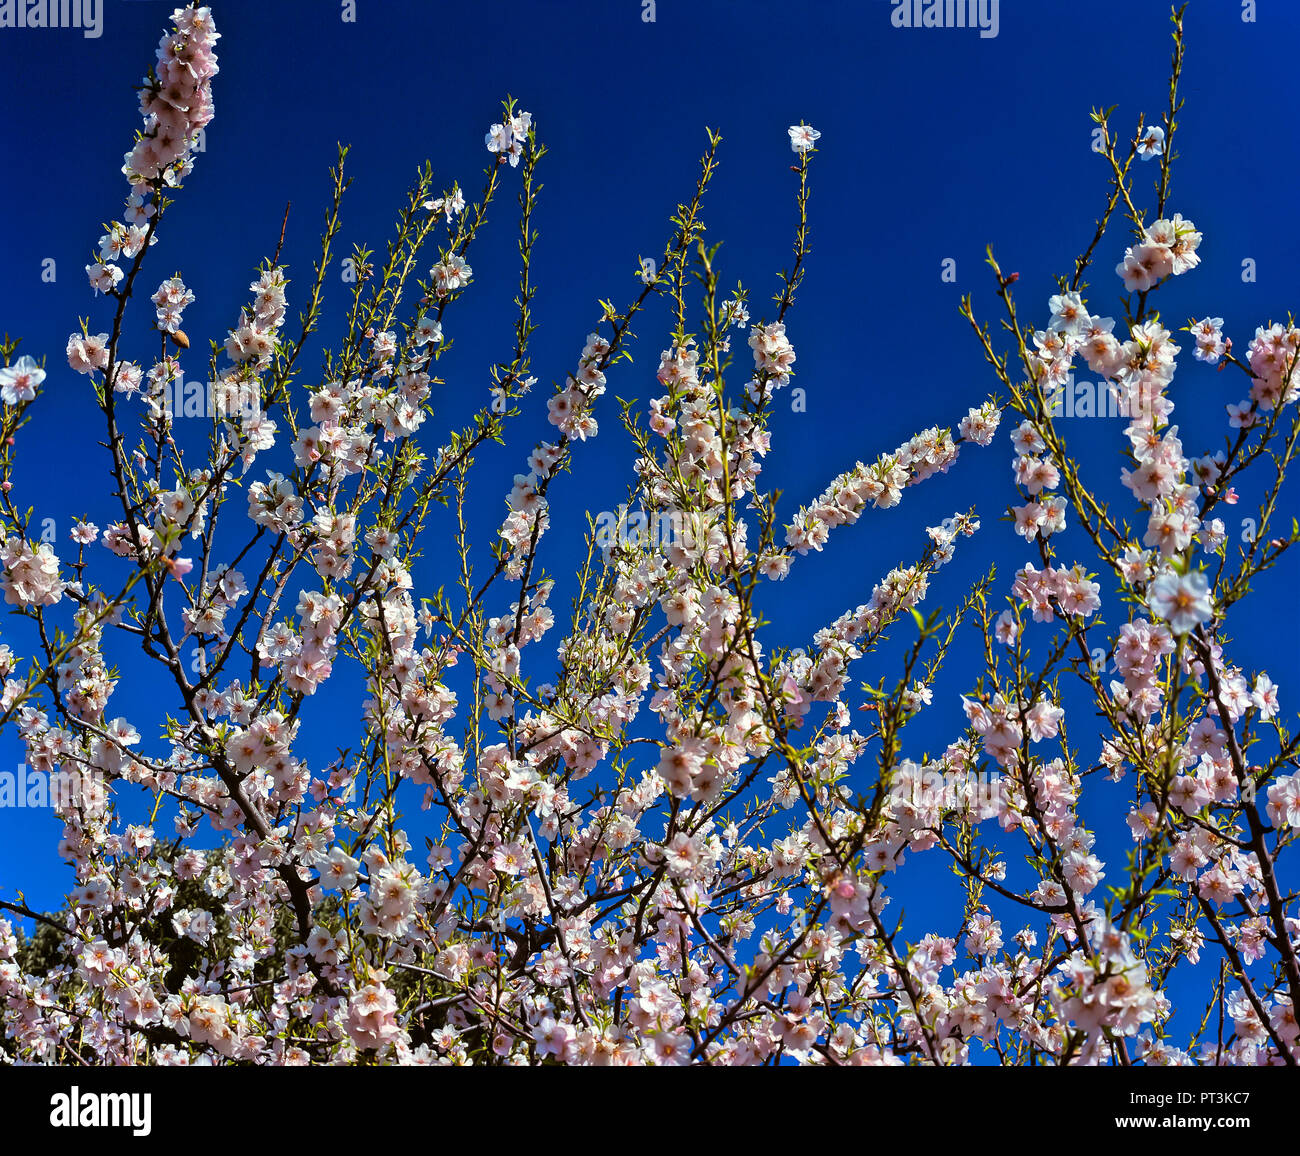 Almond tree - flowers. Natural Park of Sierra Magina. Jaen - province. Region of Andalusia. Spain. Europe Stock Photo